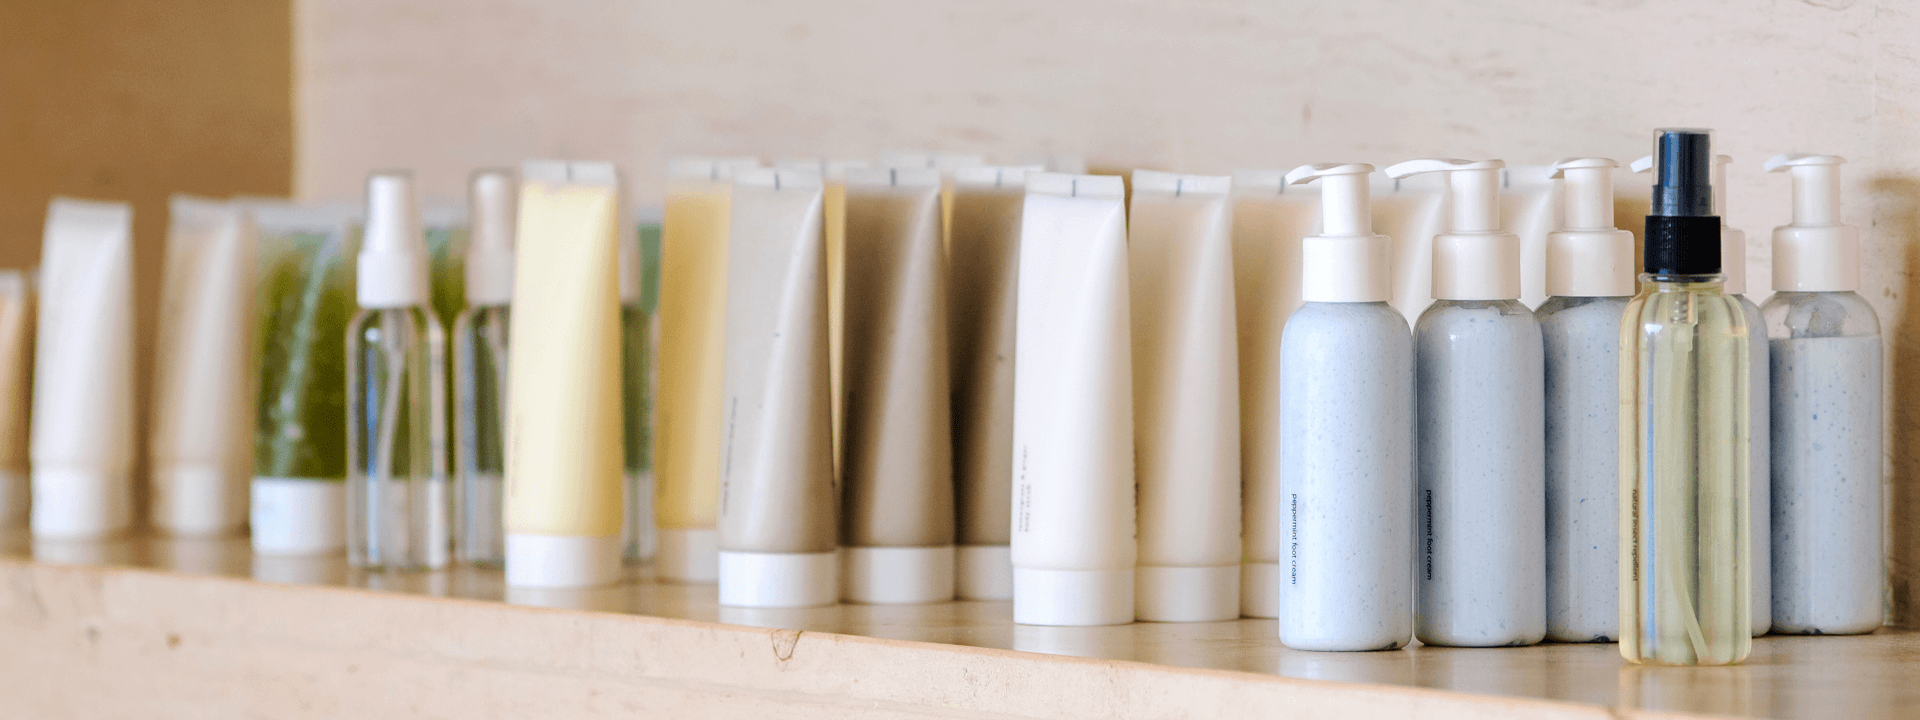 What You Might Not Know About the Skincare Products You’re Using